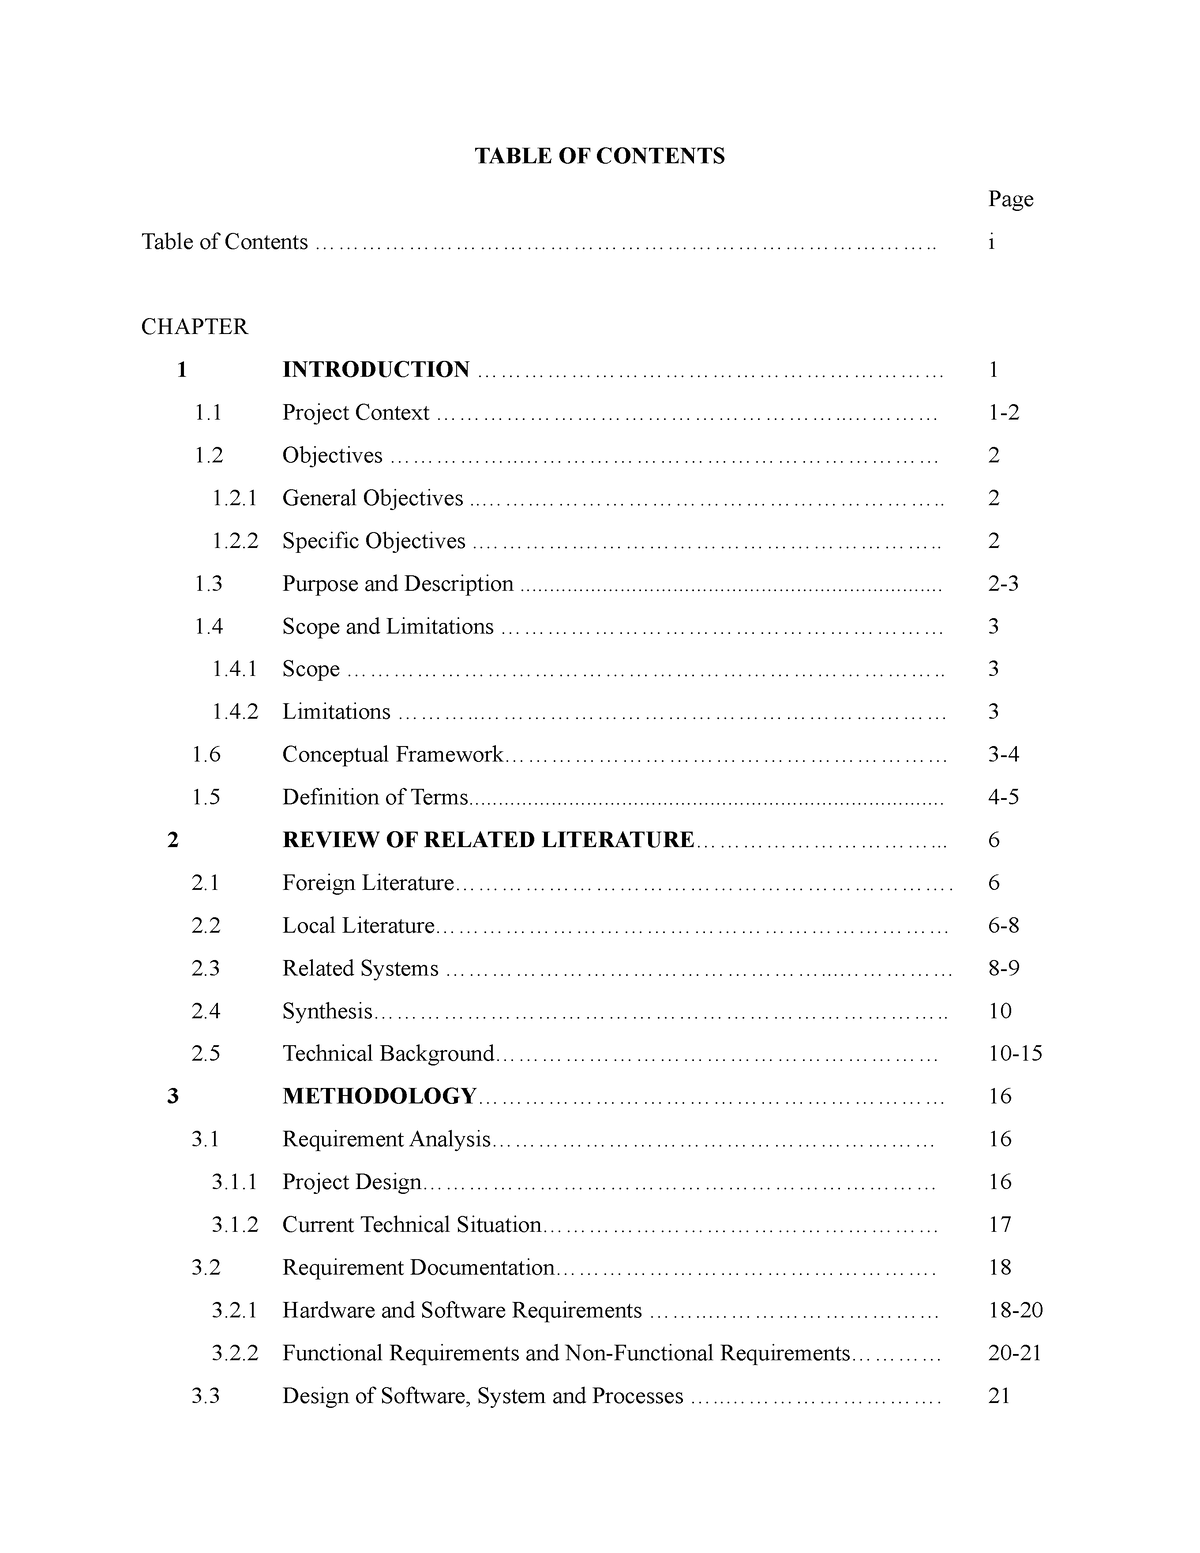 example of table of contents for research paper